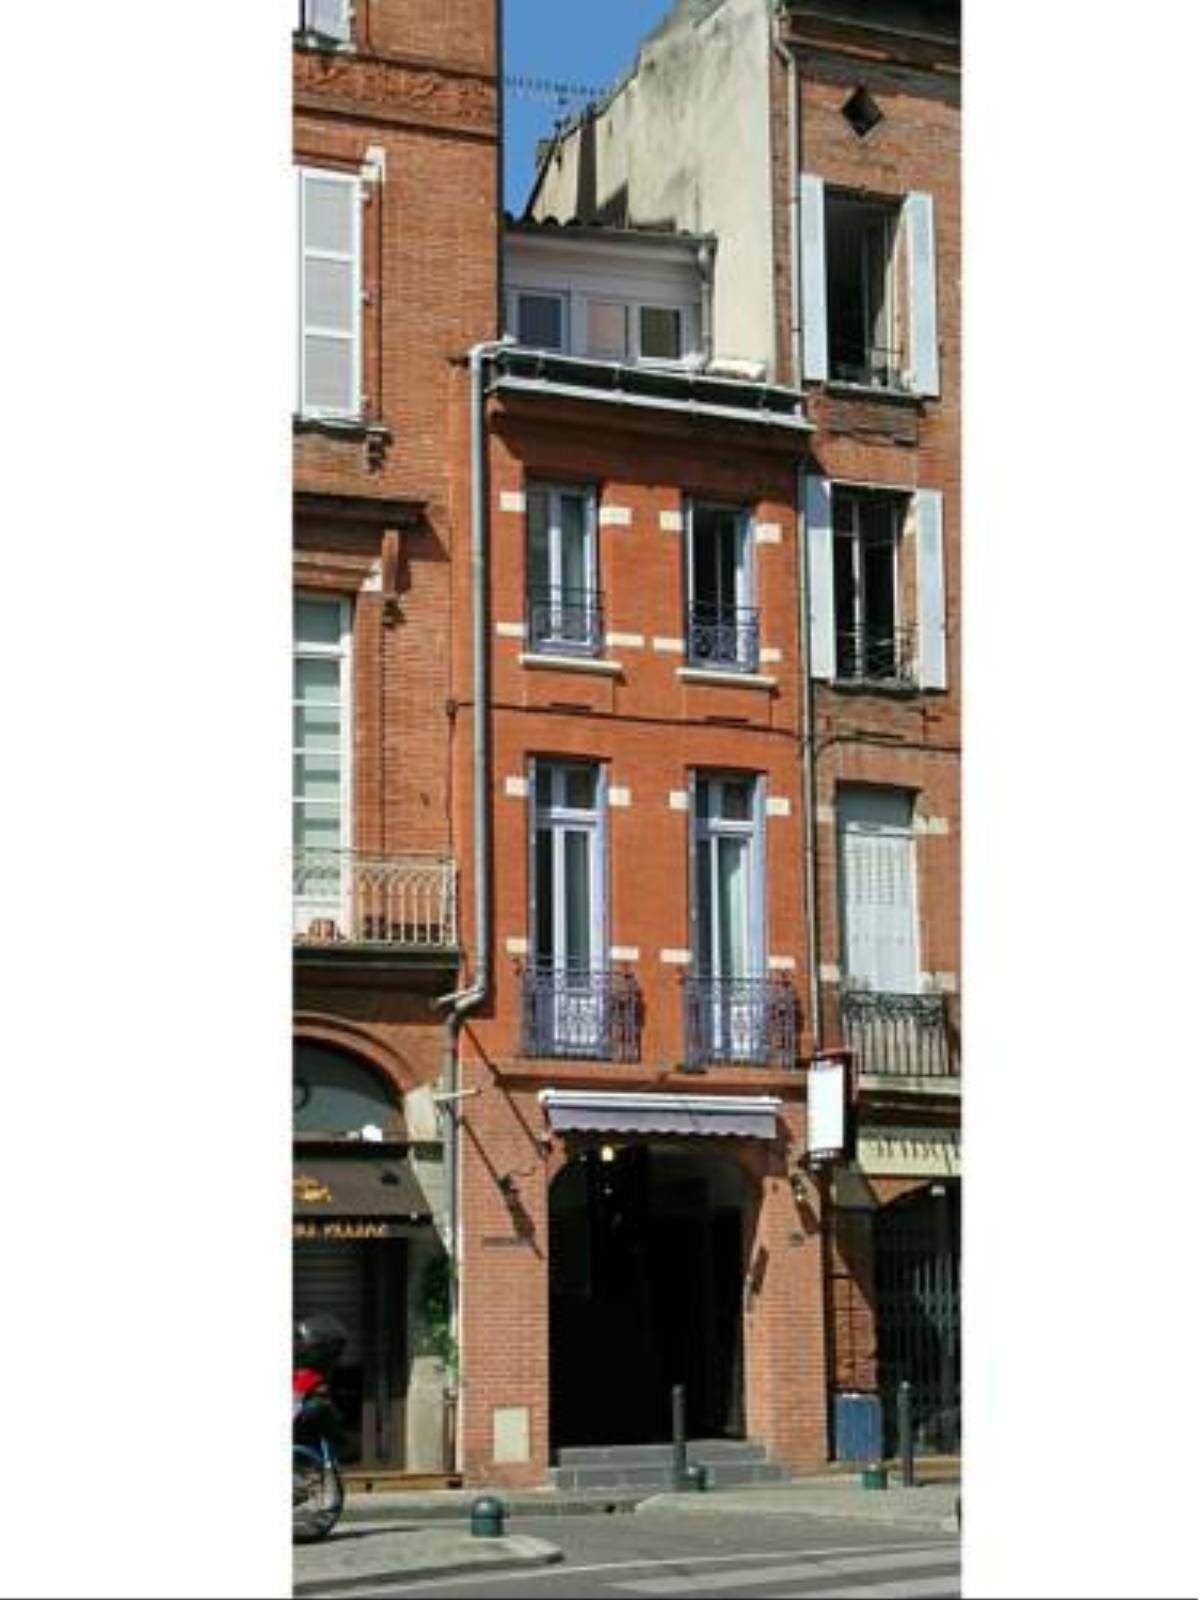 Appartements Gambetta Hotel Toulouse France